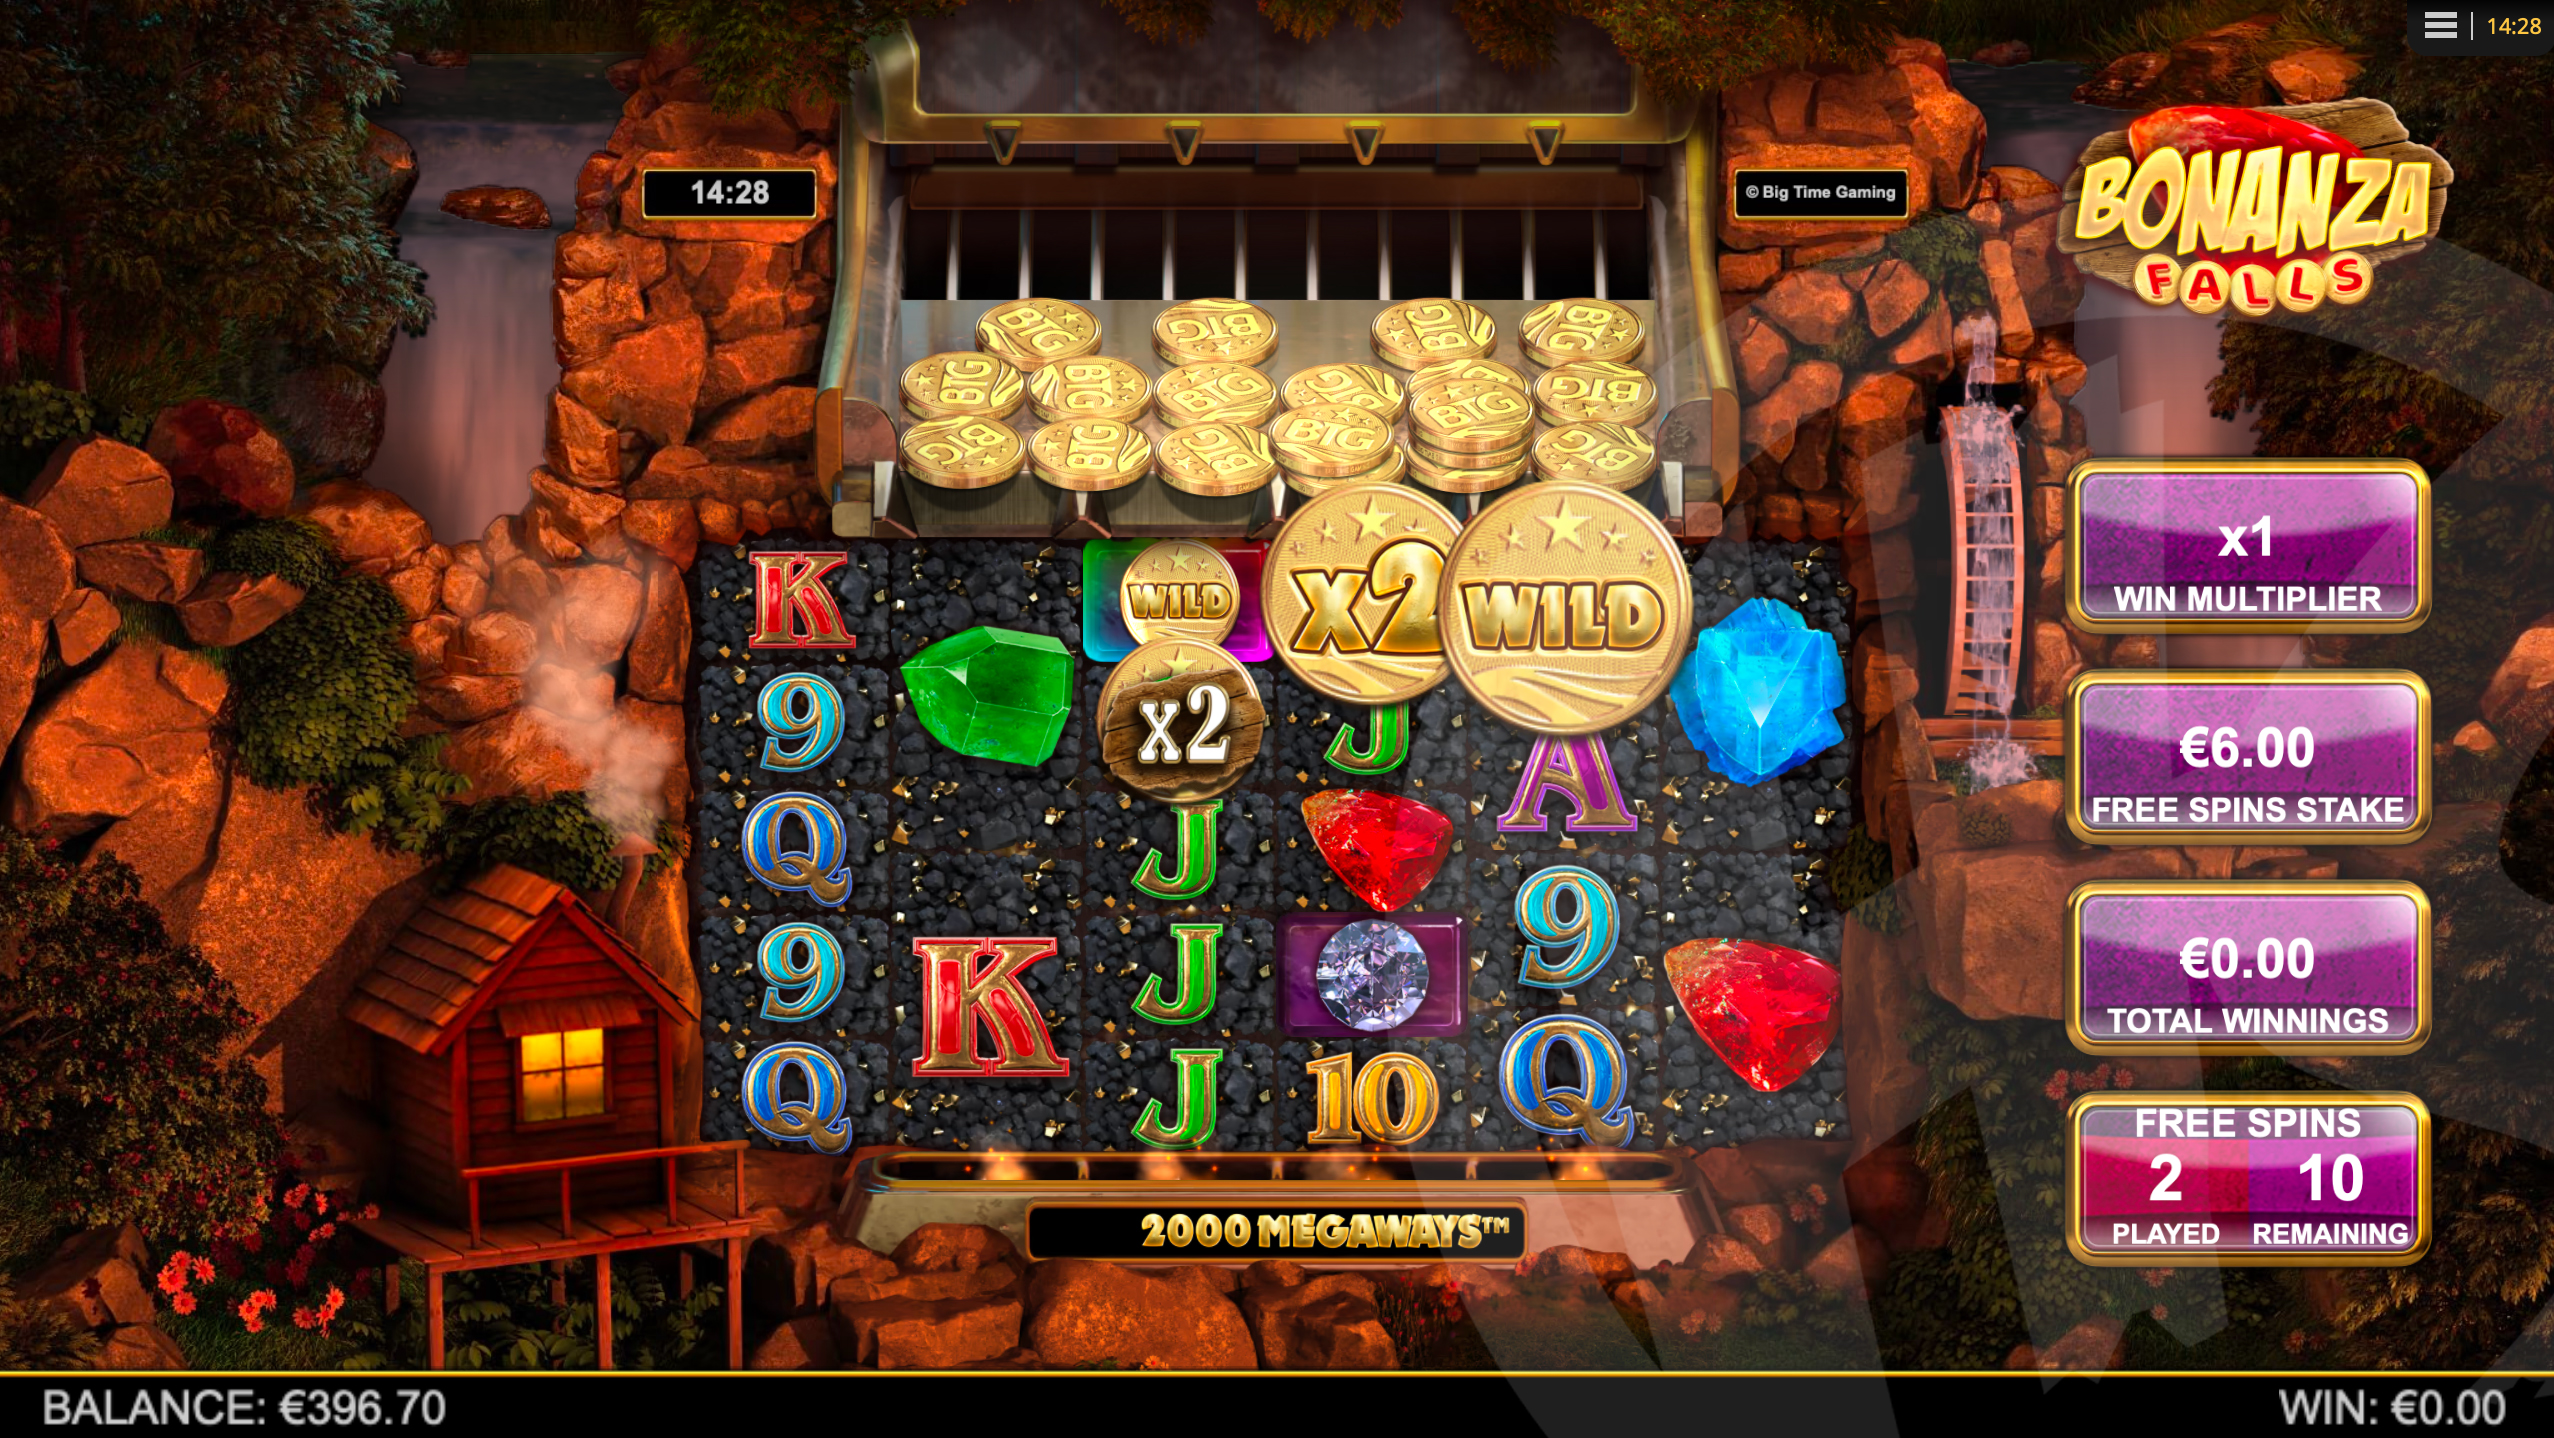 Bonus Coins Can Drop Onto the Reels During Free Spins with Megadozer